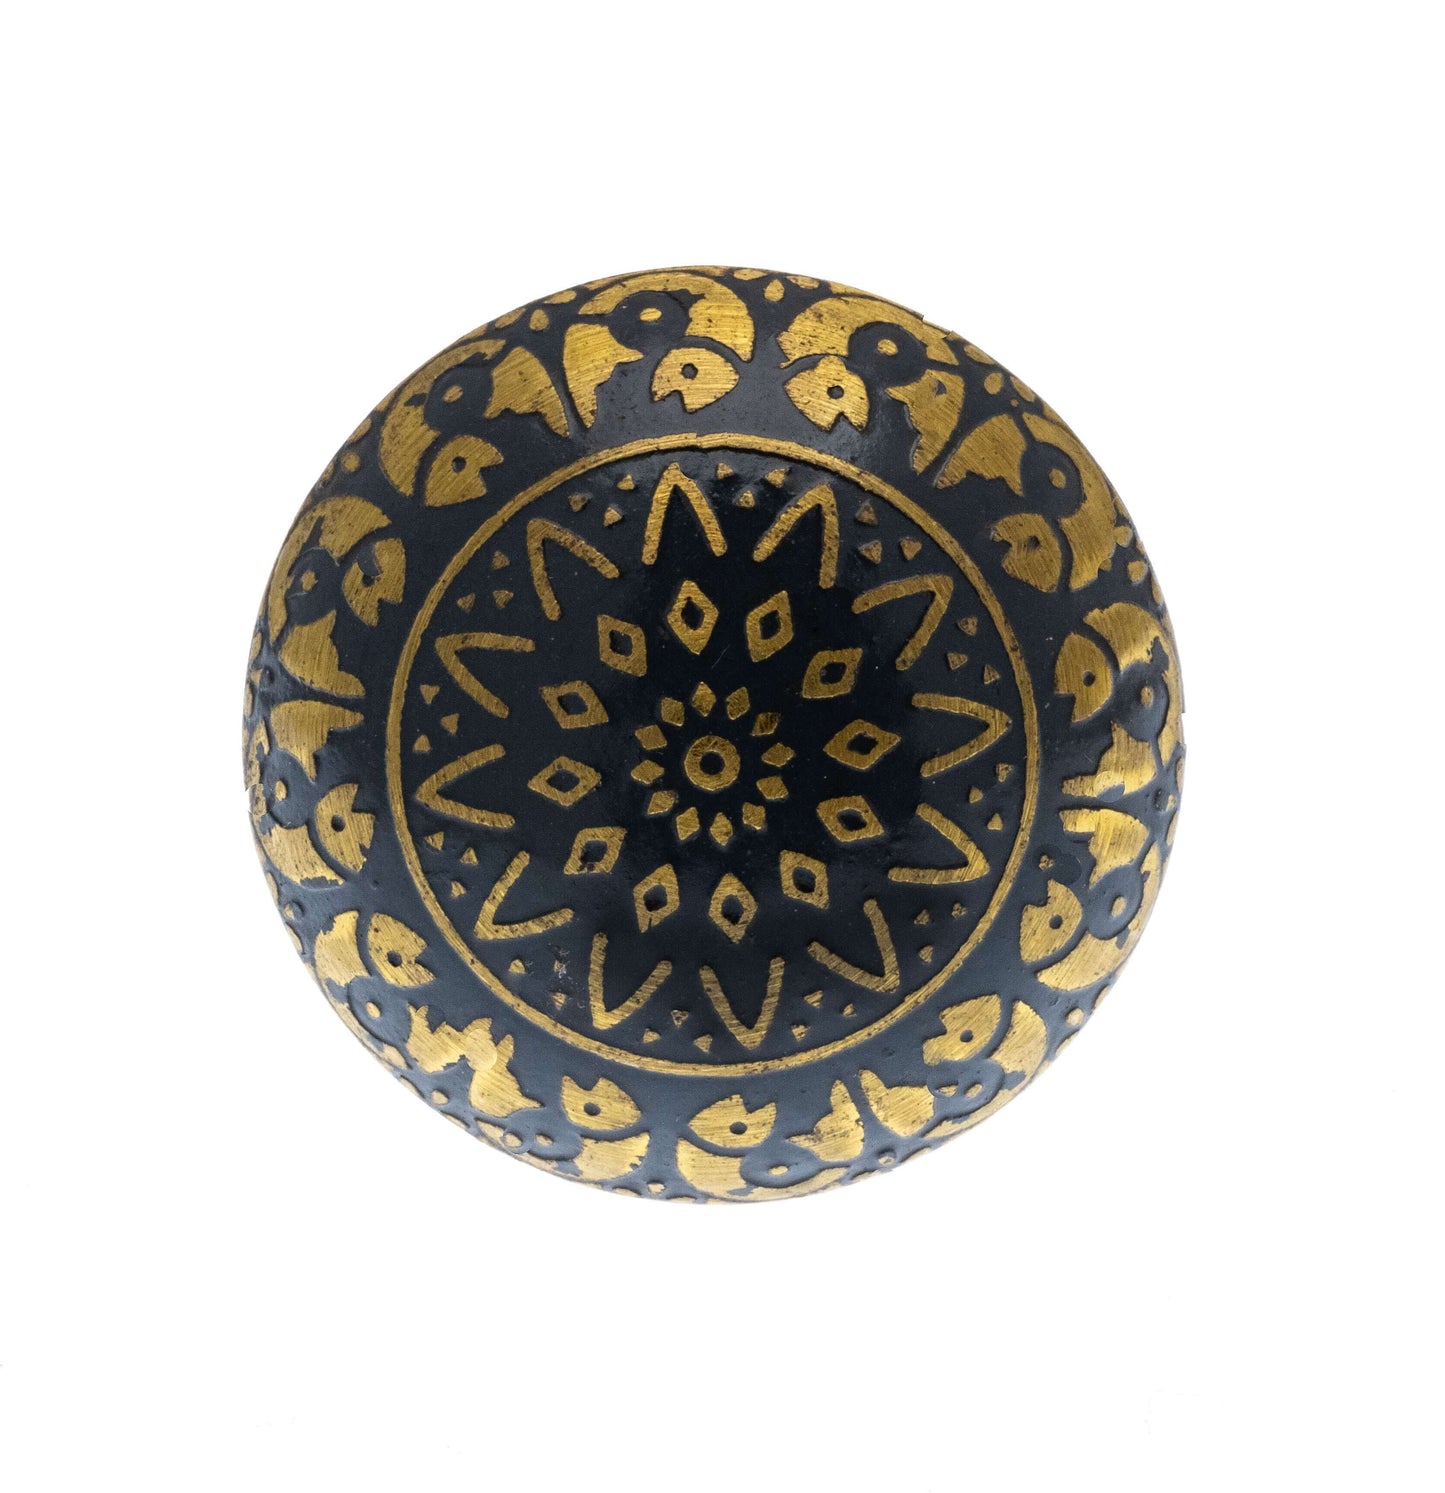 Etched Patterned Brass Dome Moroccan Style Knob for Cupboards in Dark Grey and Gold